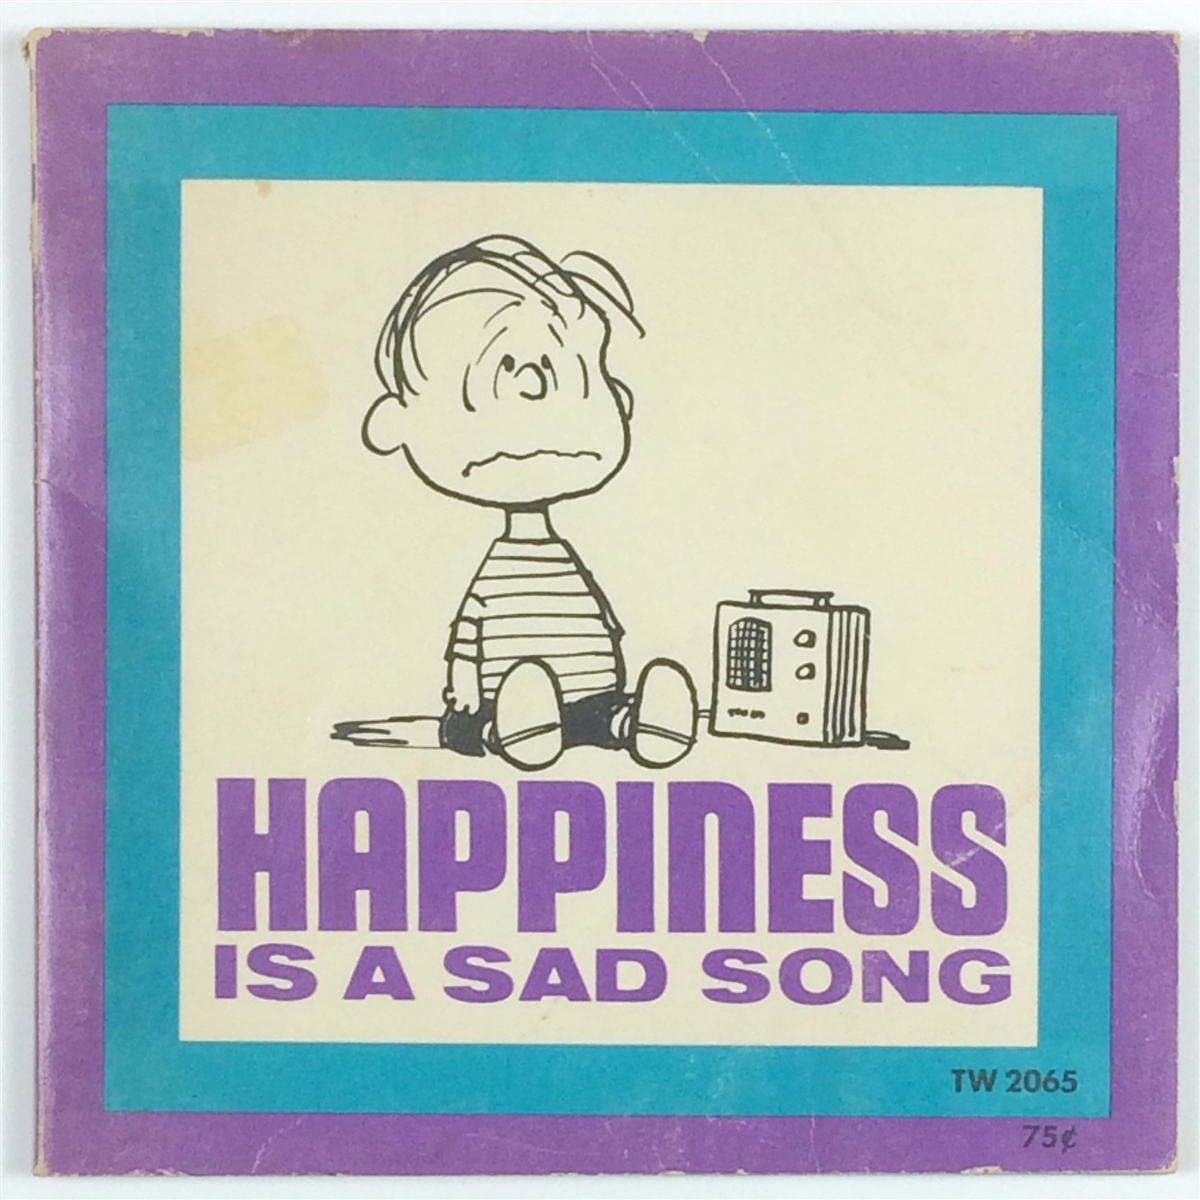 Charlie Brown about Vinyl. Comic book Happy and Sad. Be happy you be sad